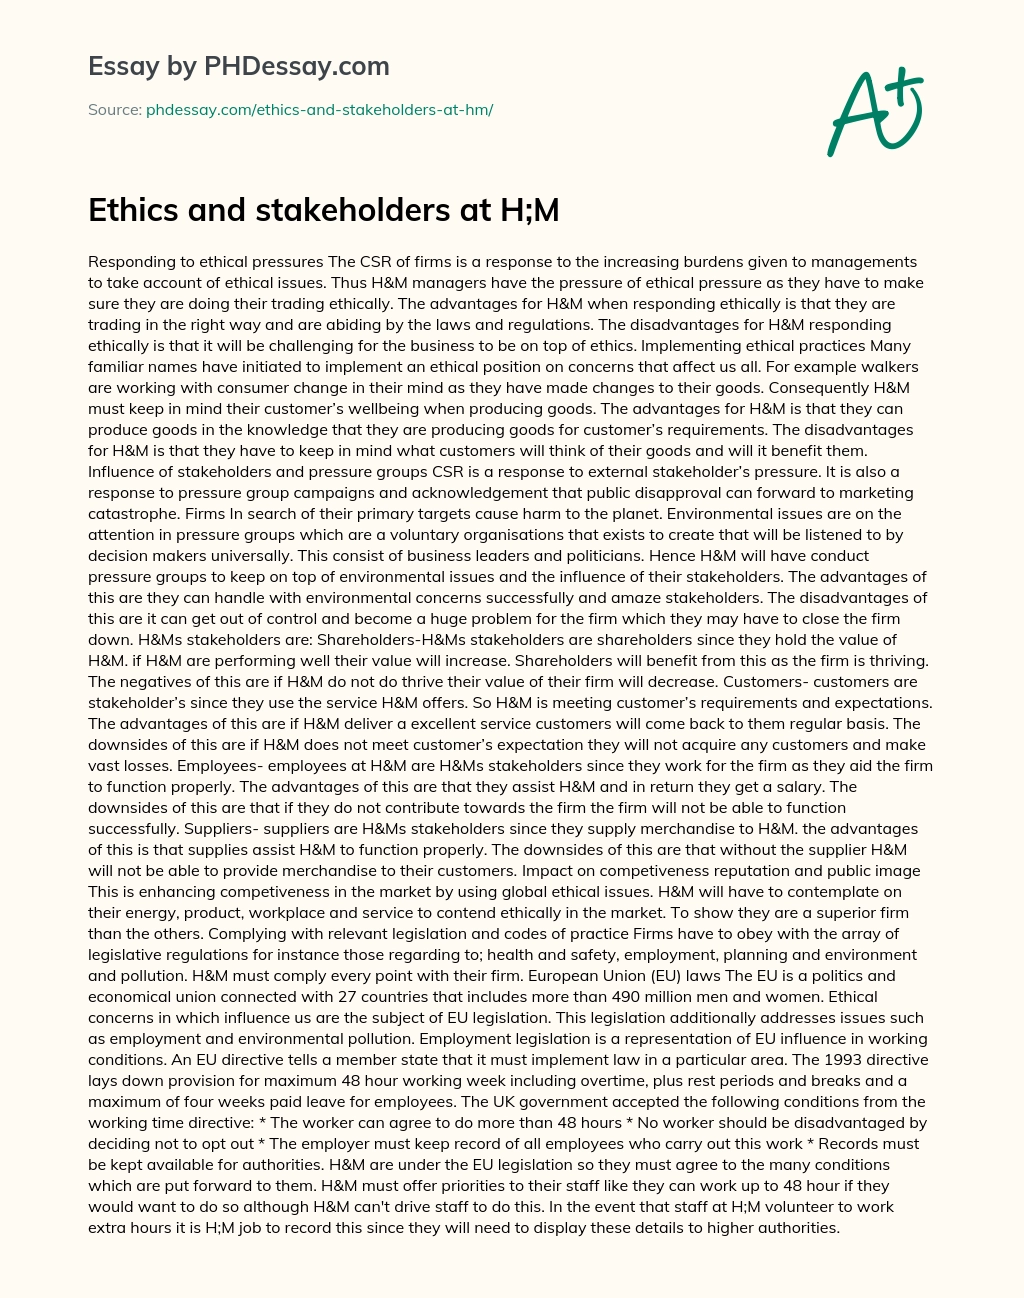 Ethics and stakeholders at H;M essay